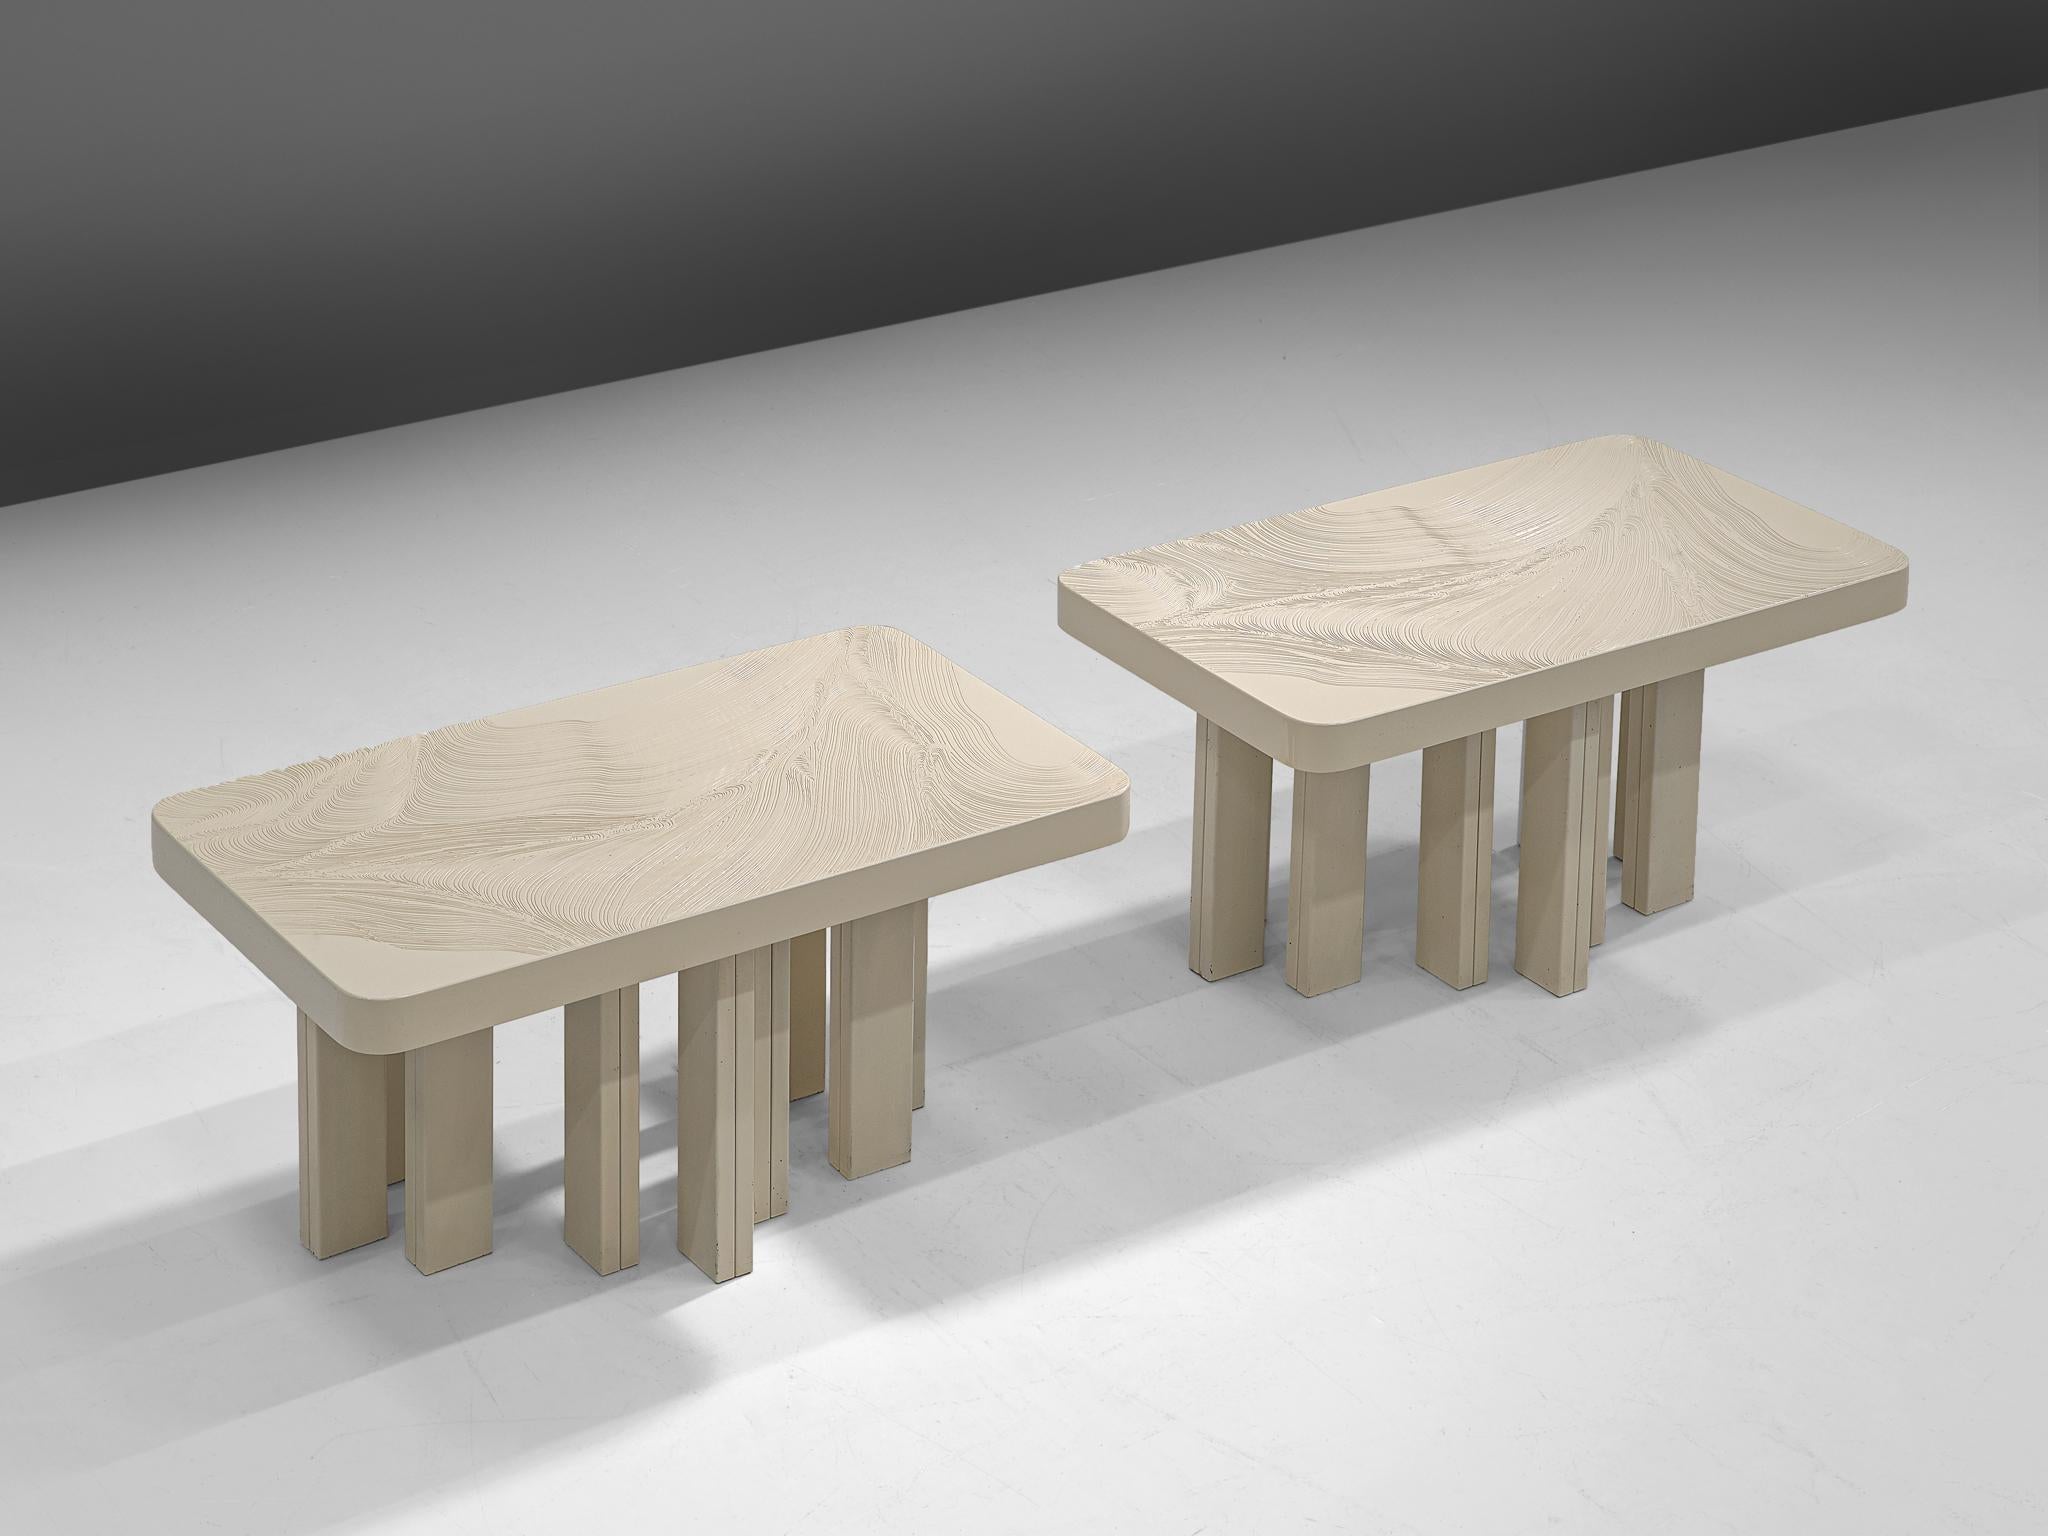 Jean Claude Dresse, pair of side tables, sculpted resin and steel, Belgium, 1970s

Elegant pair of coffee tables by the Belgian designer and artist Jean Claude Dresse. The tables feature table tops of white resin with an etched organic pattern. The